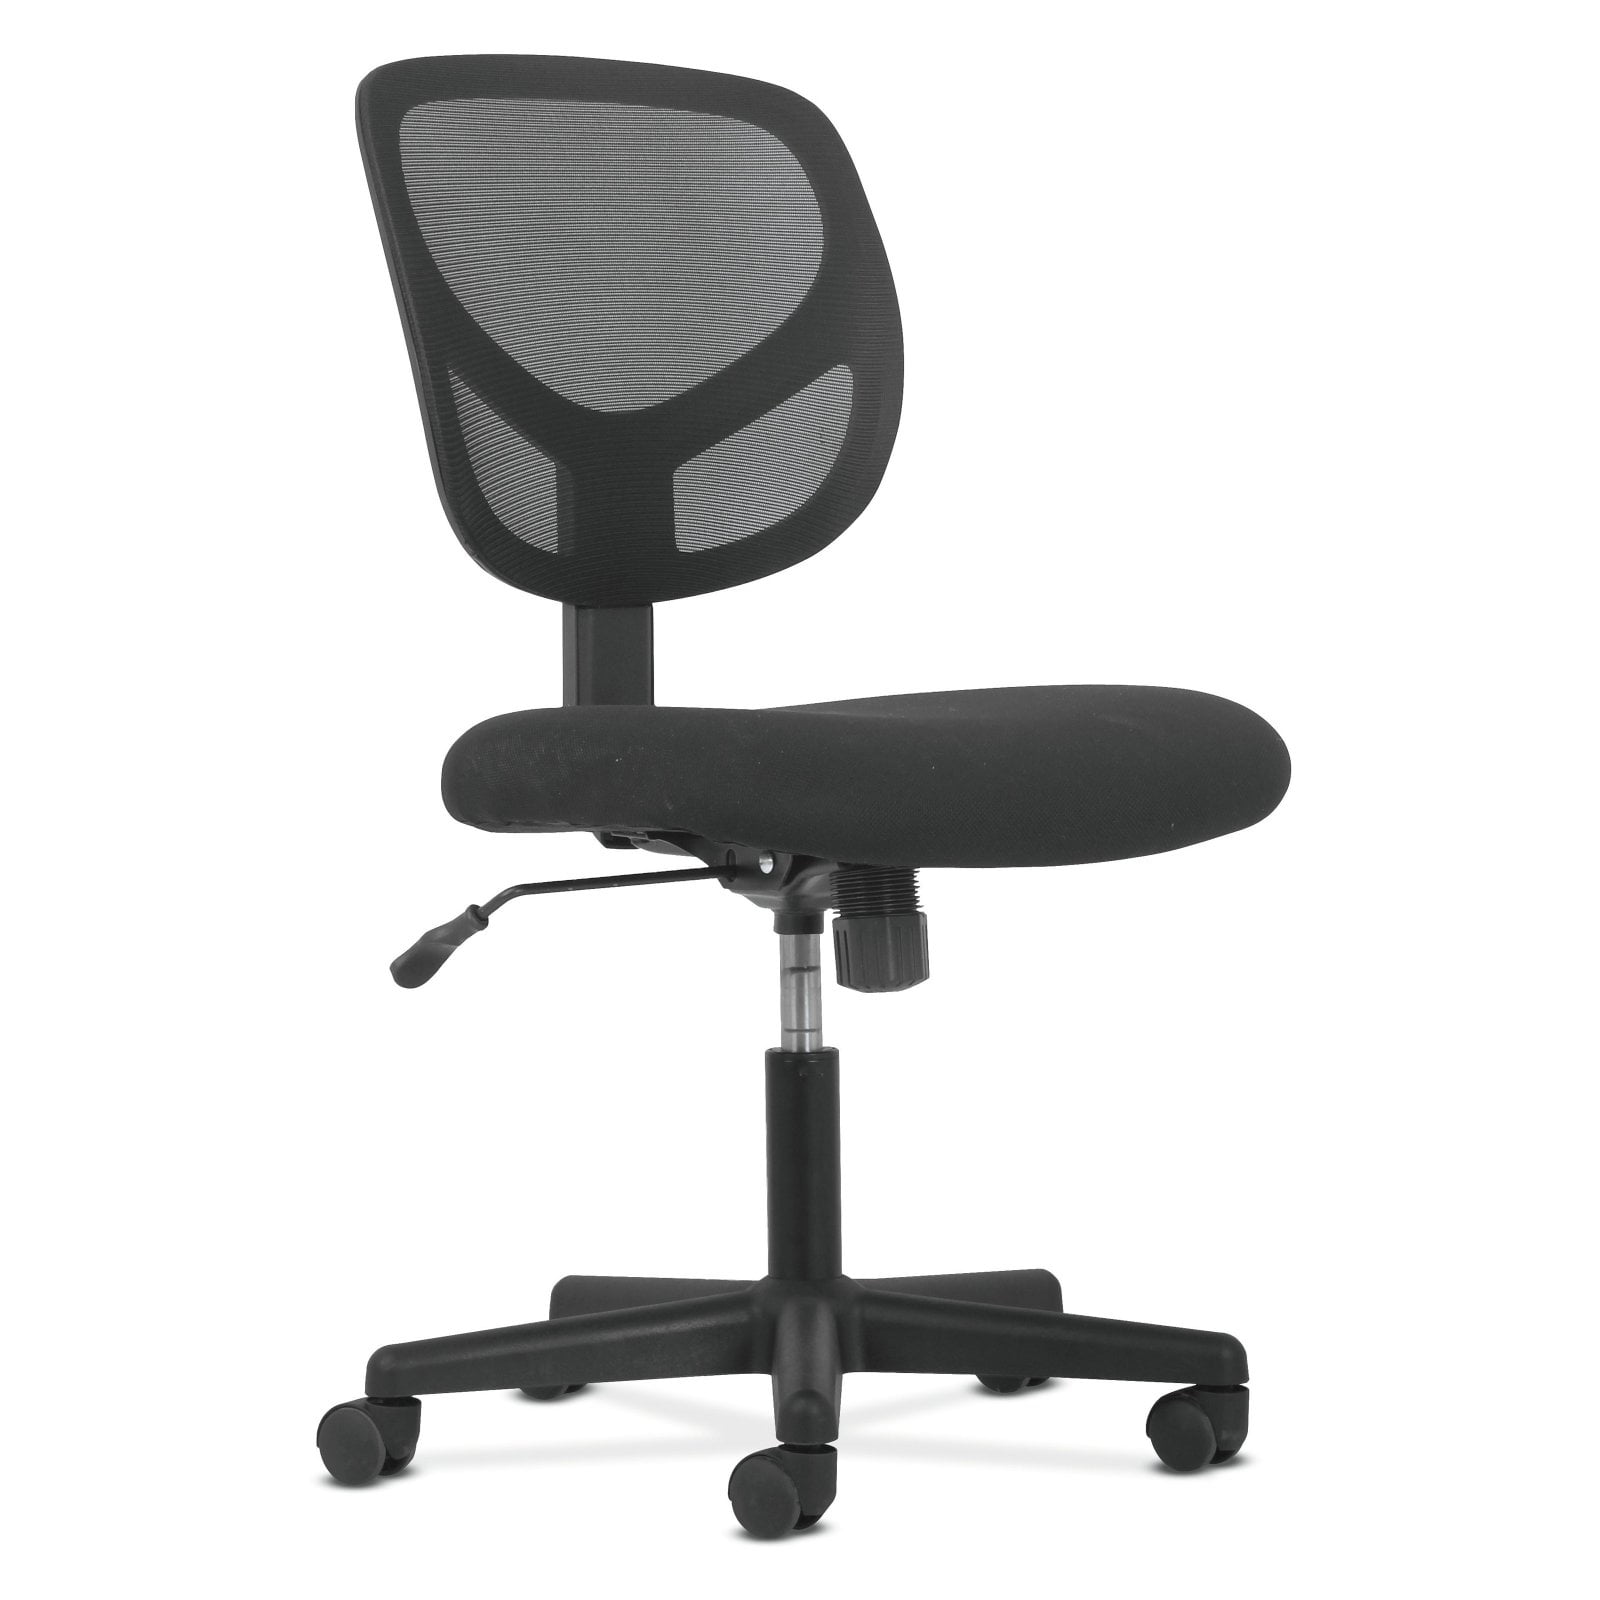 Office chair without arms